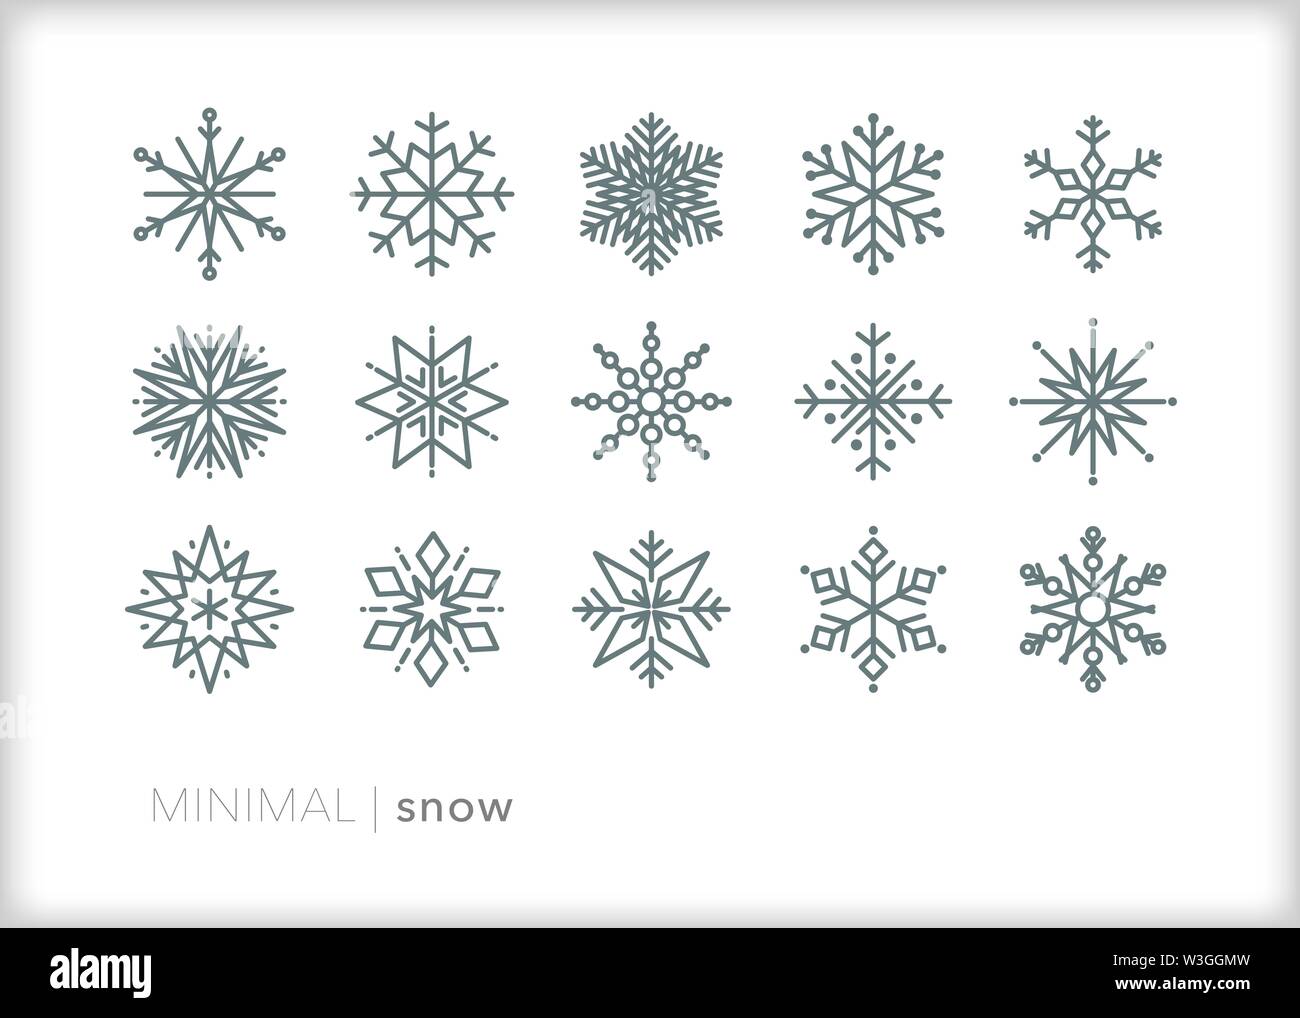 Set of 15 snow line icons of ice crystals in different organic shapes Stock Vector